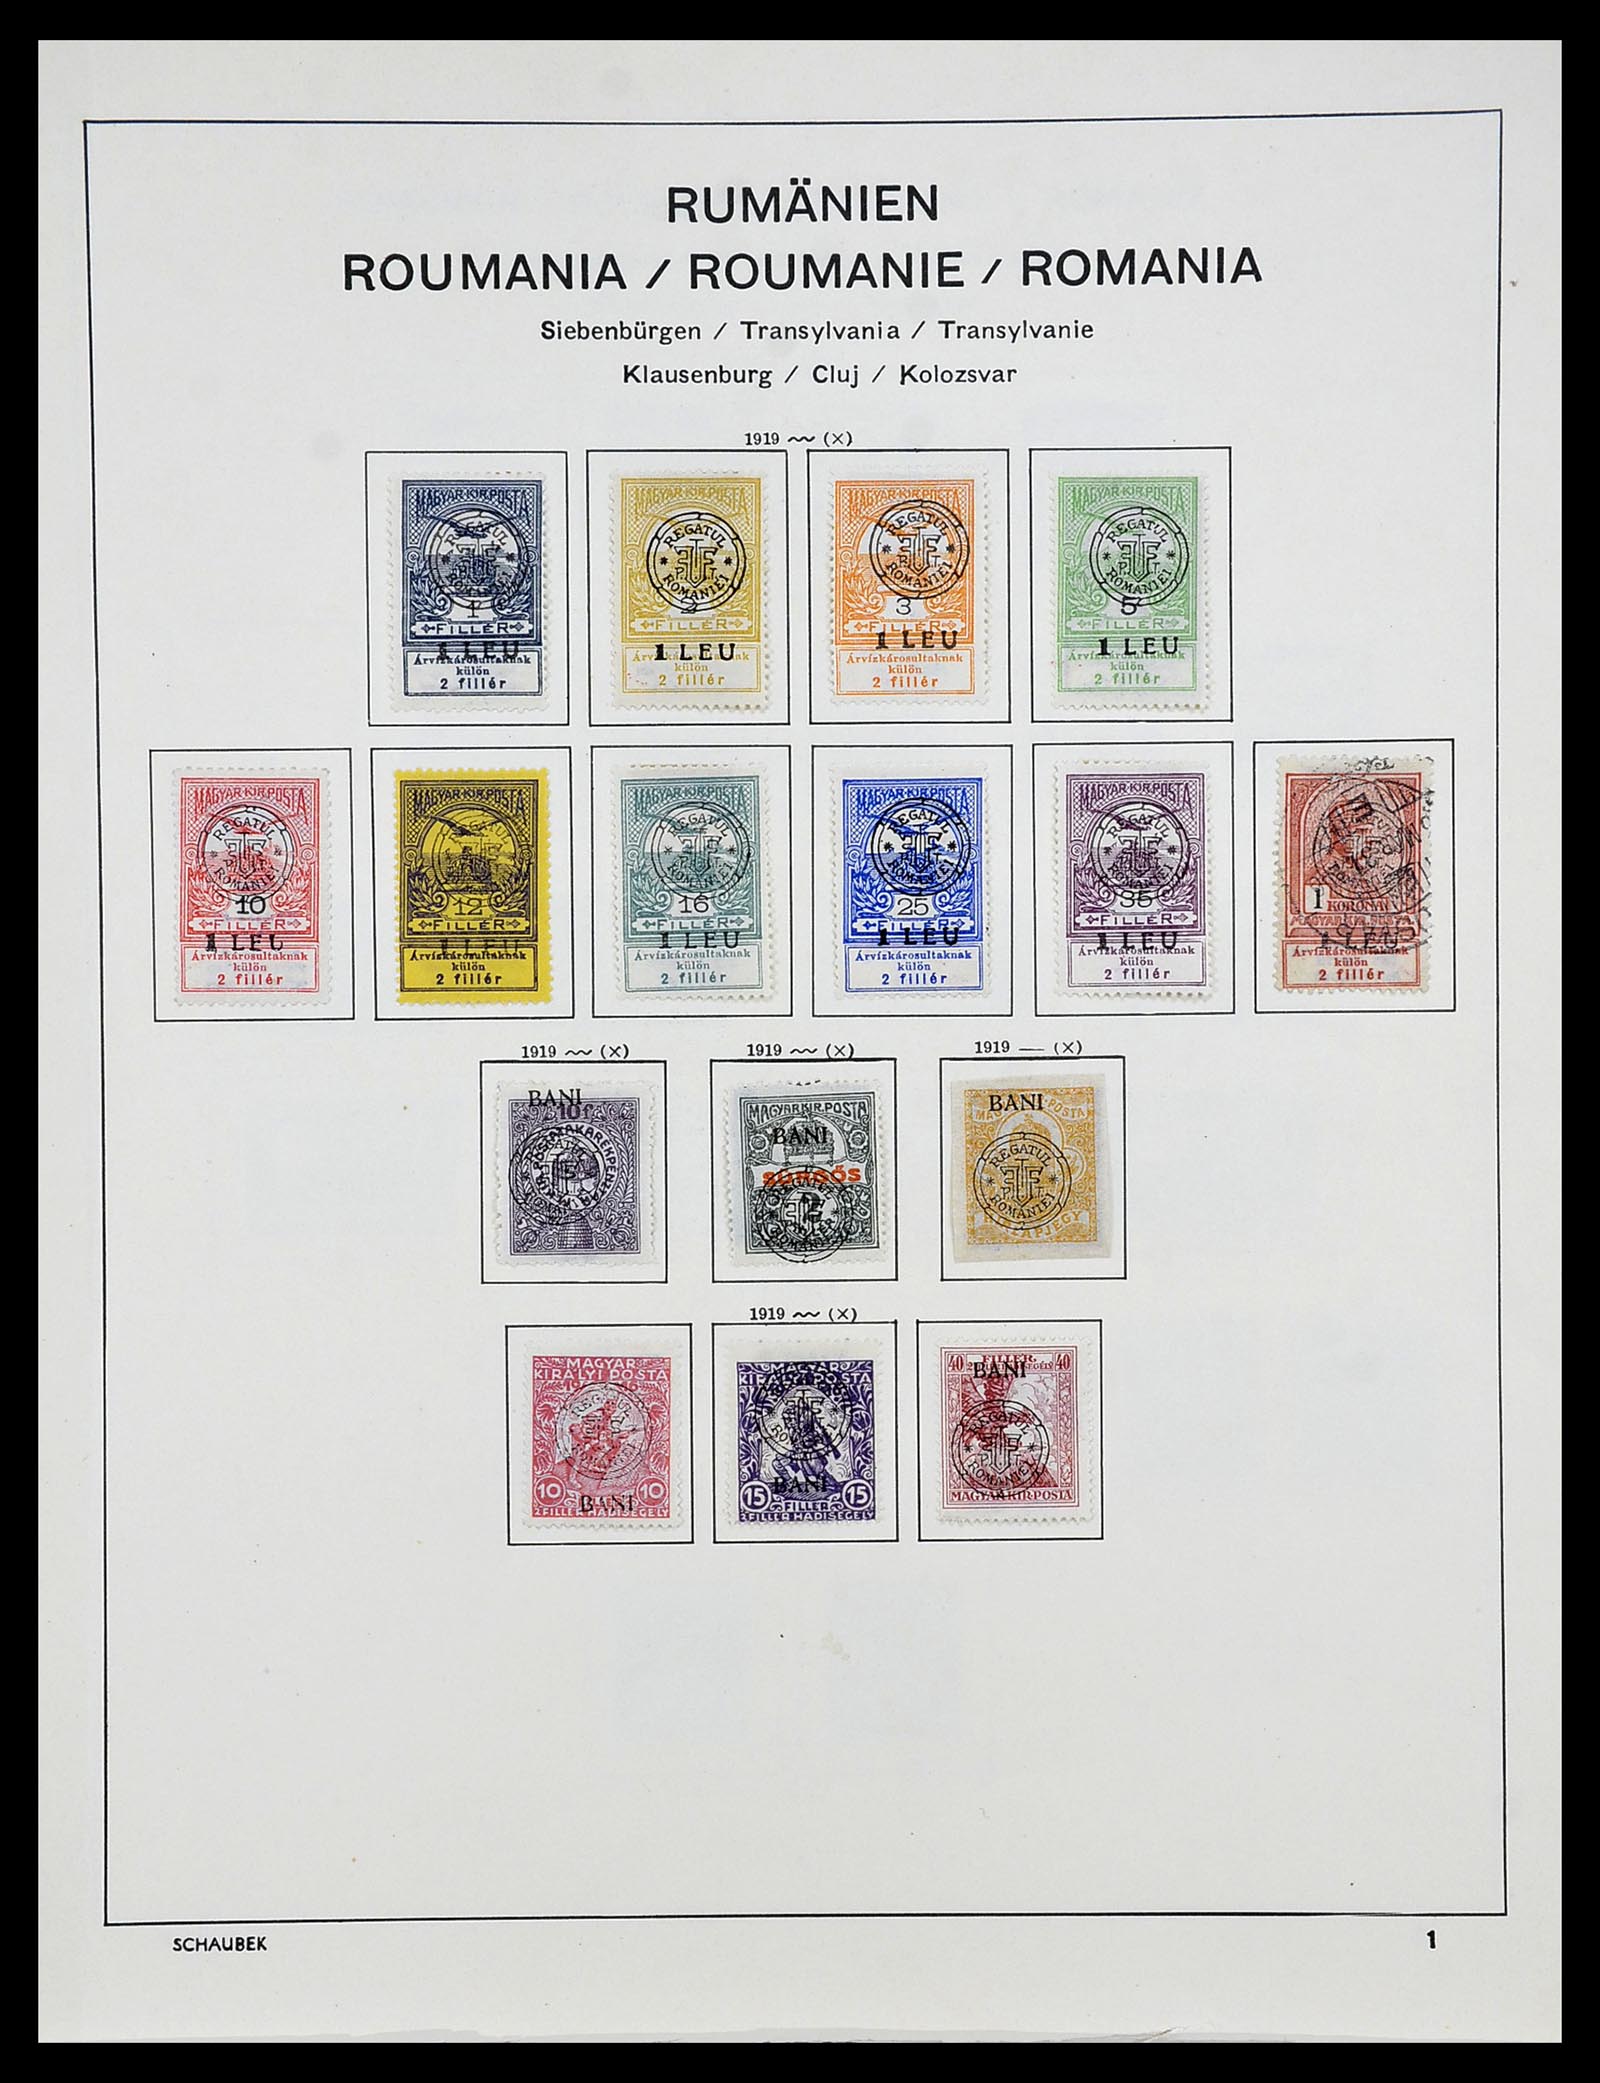 34278 001 - Stamp collection 34278 Romanian territories 1919.